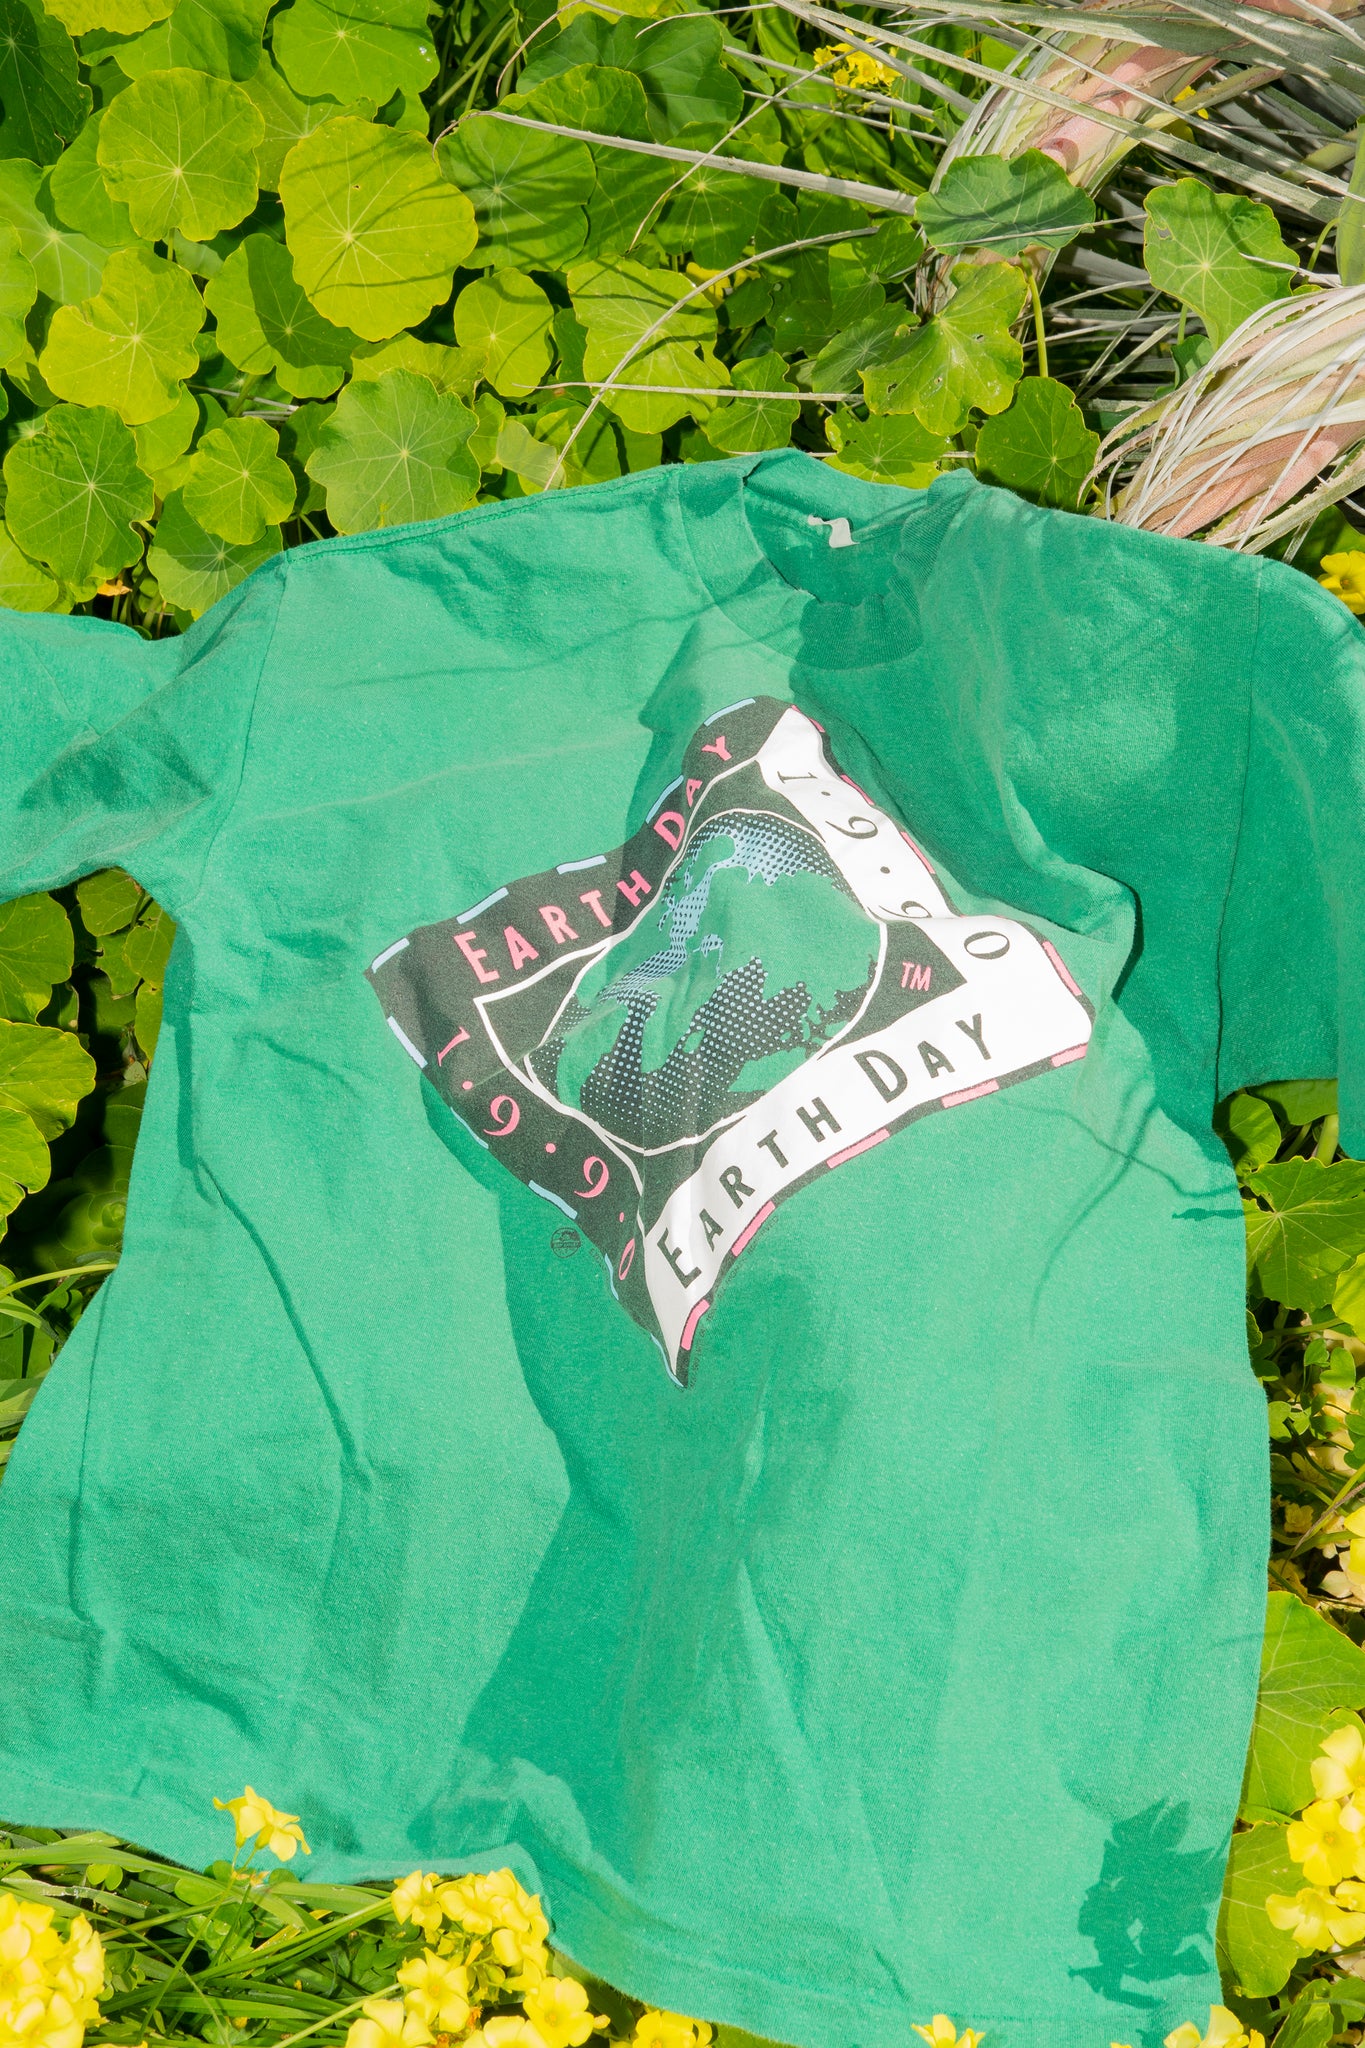 understory-shop - VINTAGE - VTG 90s EARTH DAY GREEN TEE